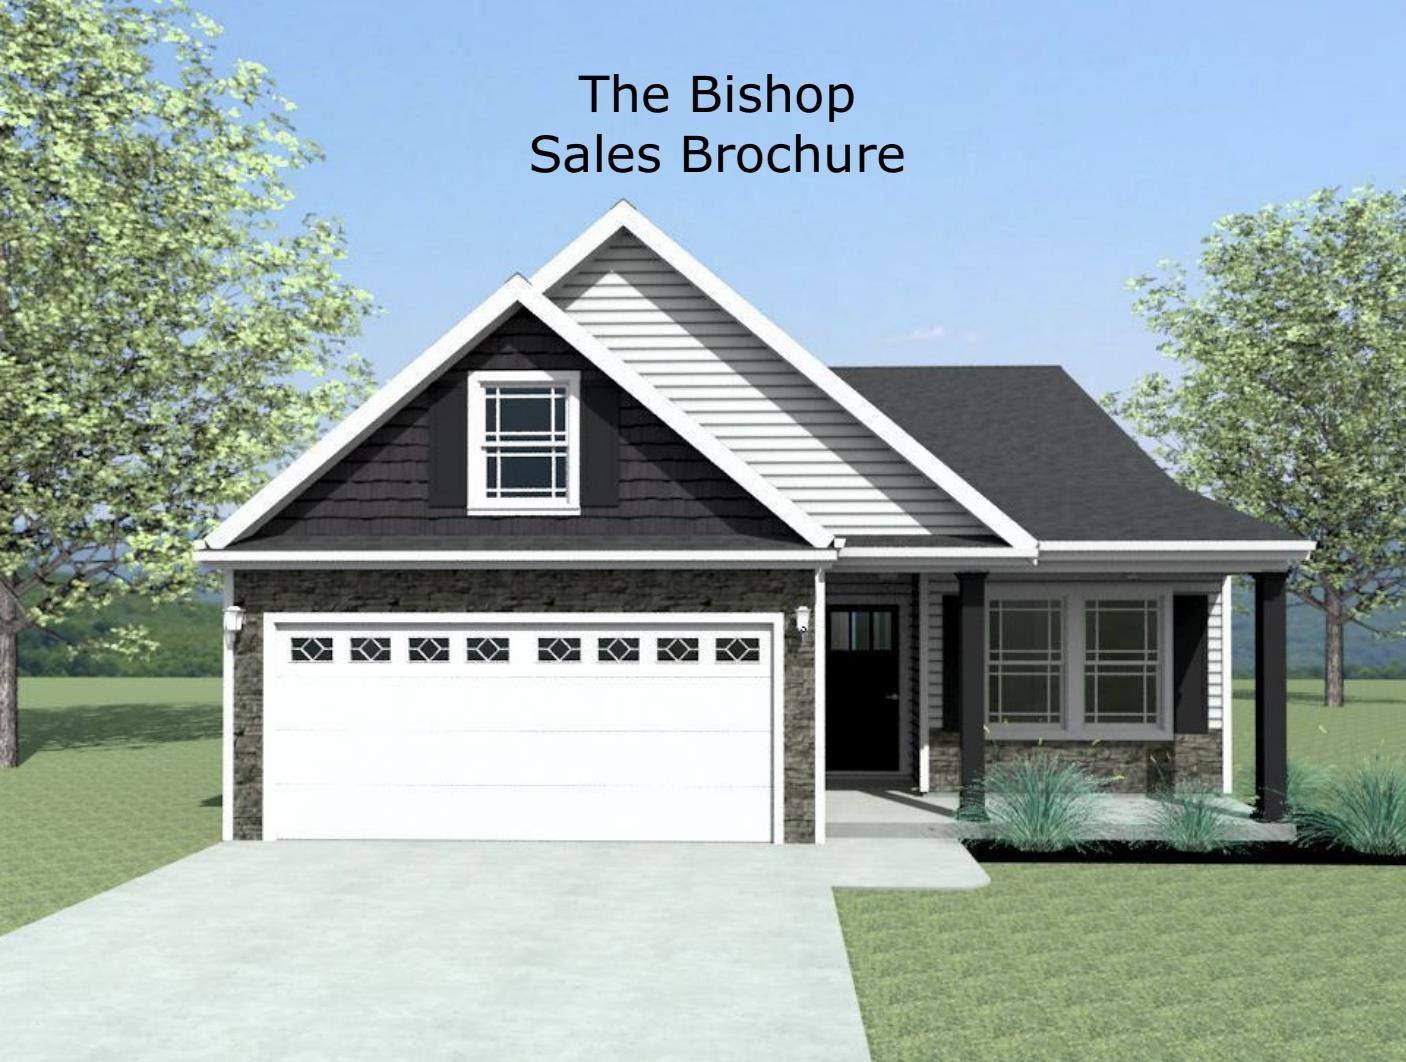 Welcome to Hampshire Heights! The Bishop with Bonus plan offers an elegant entry way, open concept living, and a 2nd floor with a bedroom, bath, and oversized bonus room. Complete with the trademark chair rail, crown molding and rope lighting.